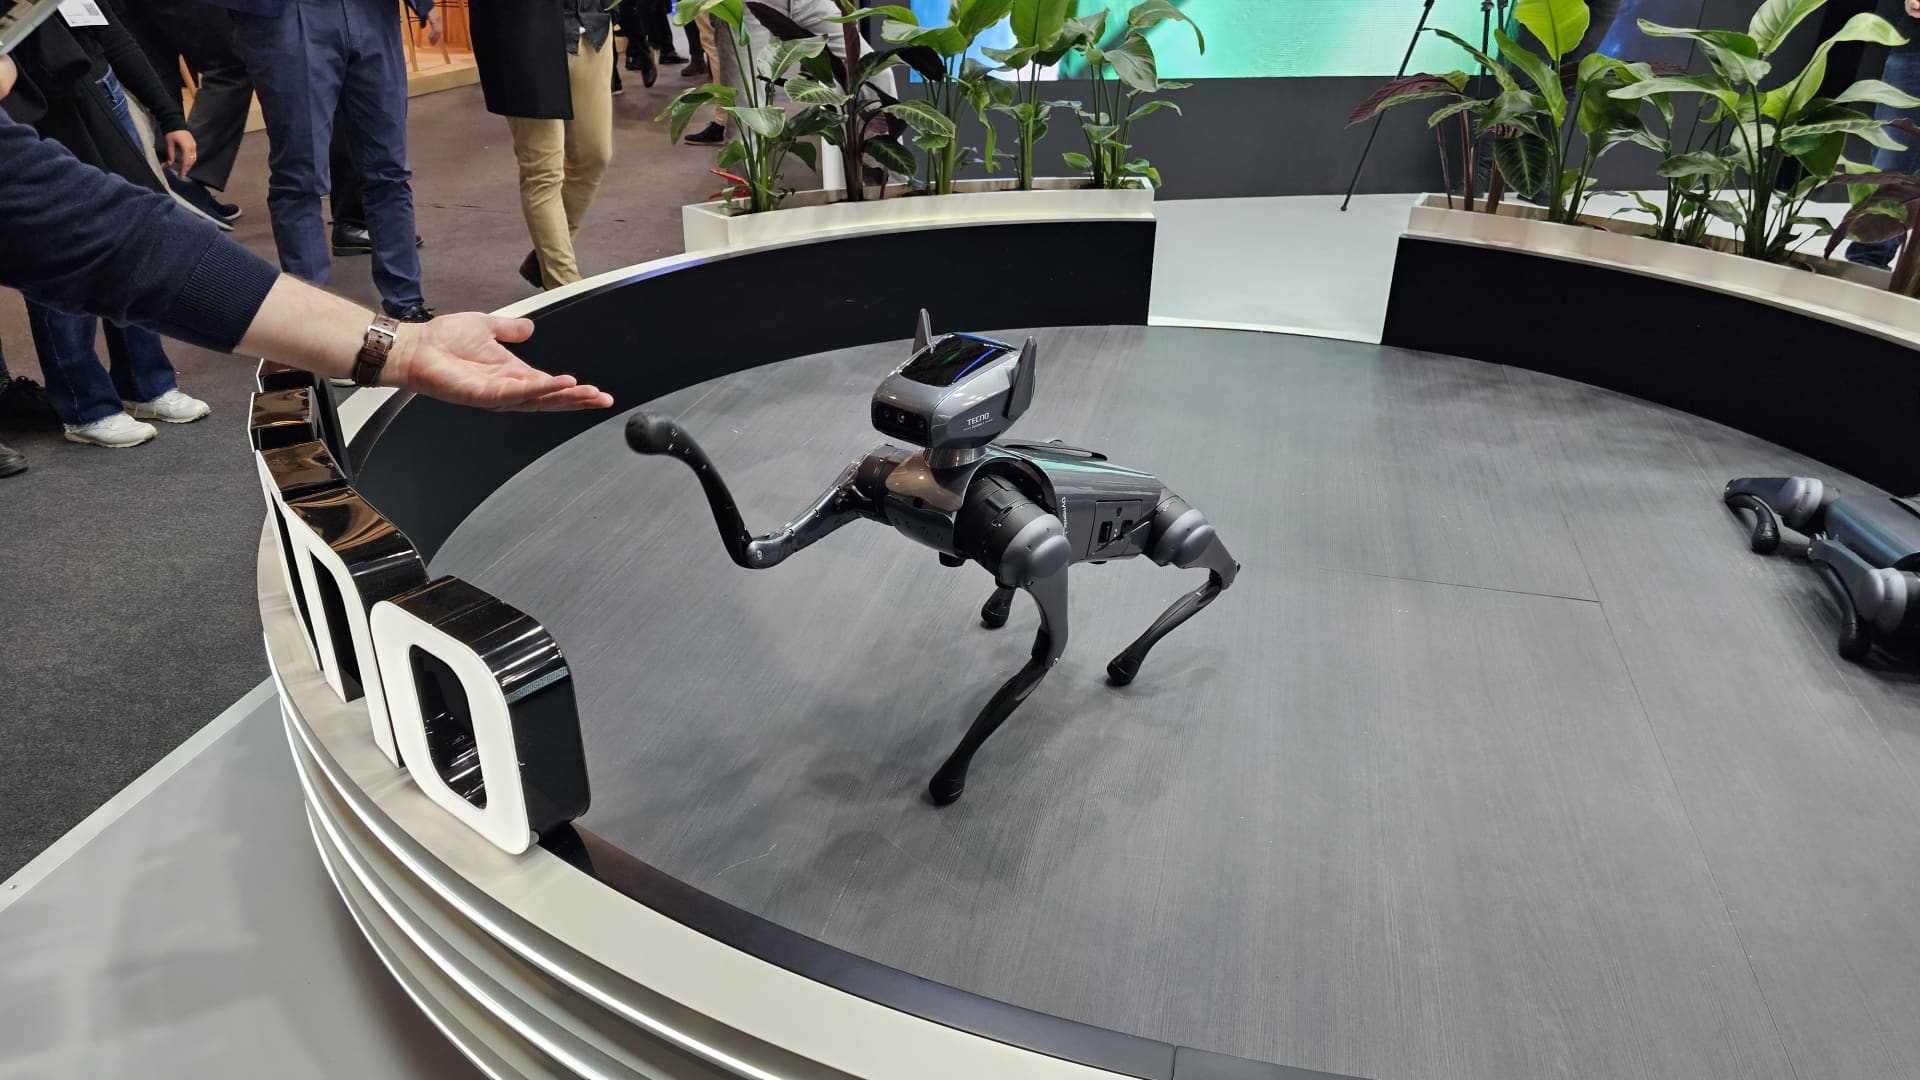 Tech giants' next bets: from robot dogs to wrist-worn smartphones